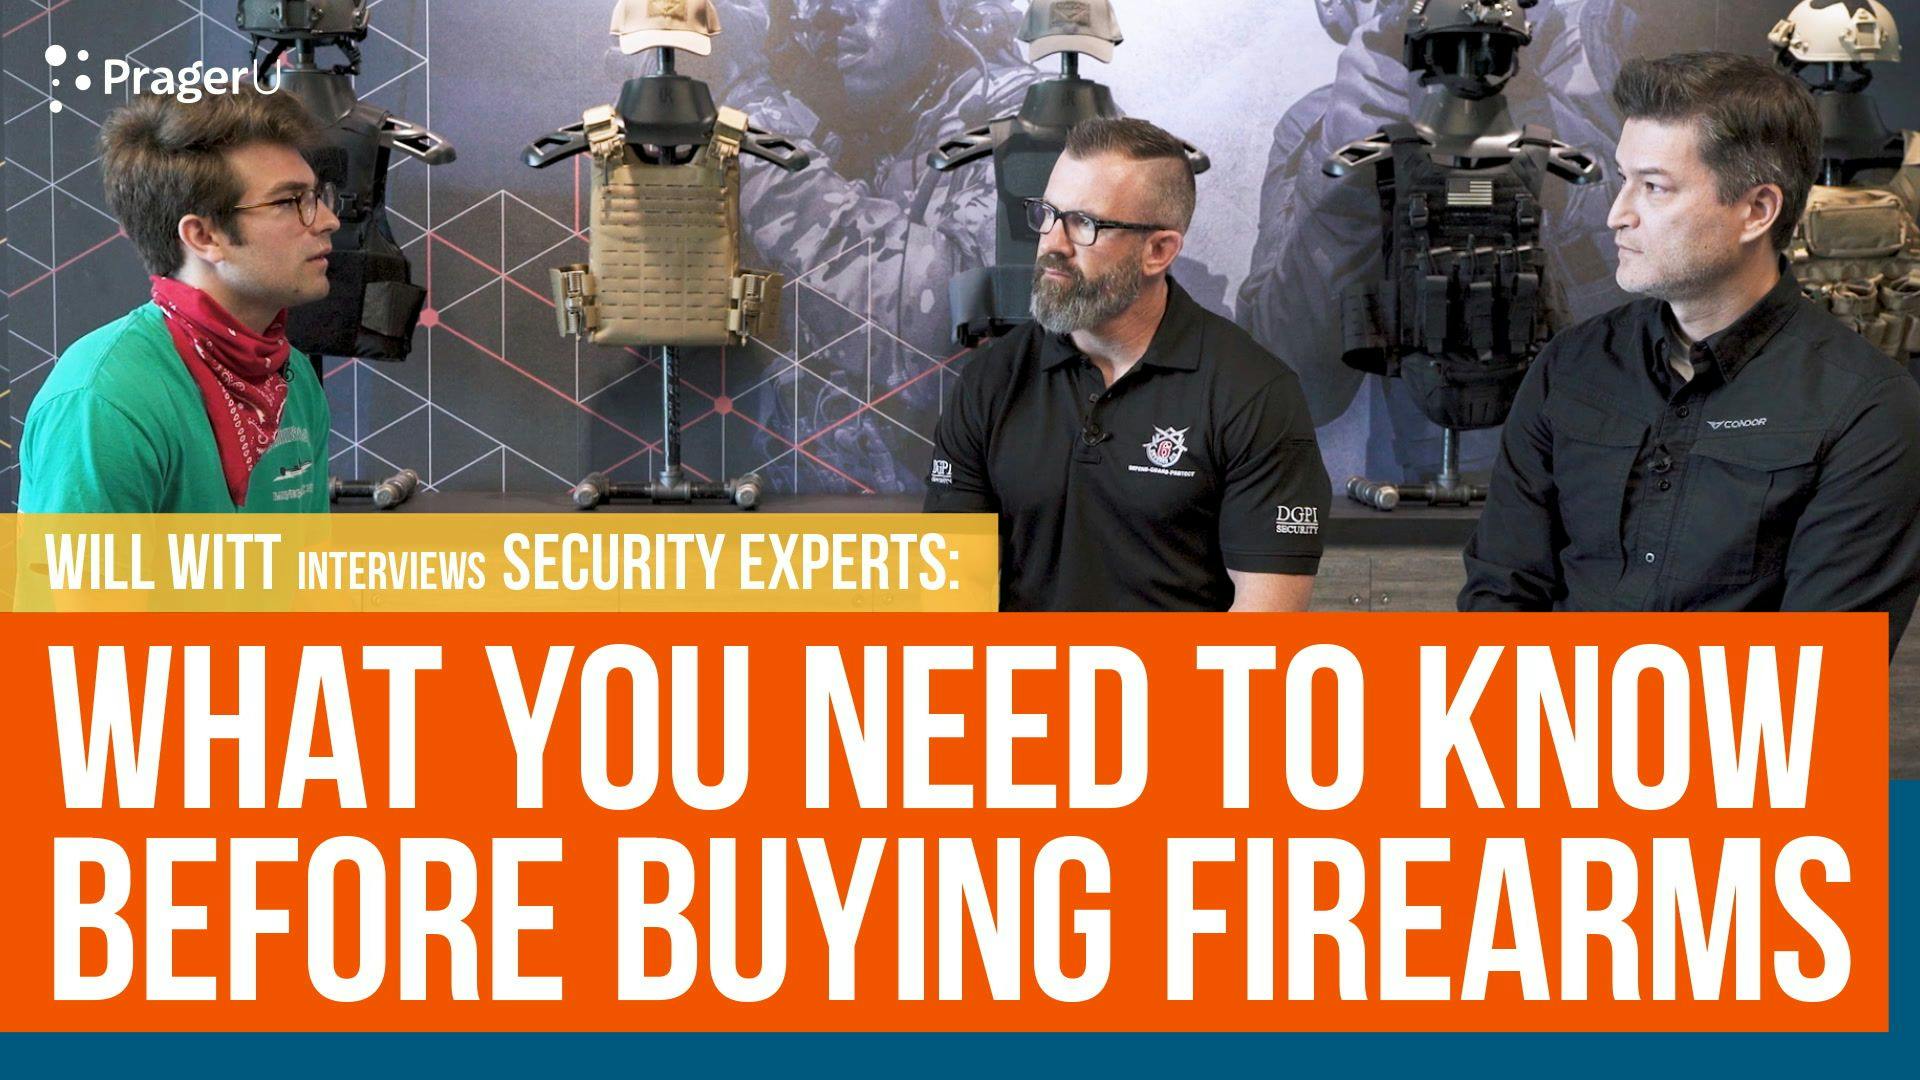 What You Need to Know Before Buying Firearms